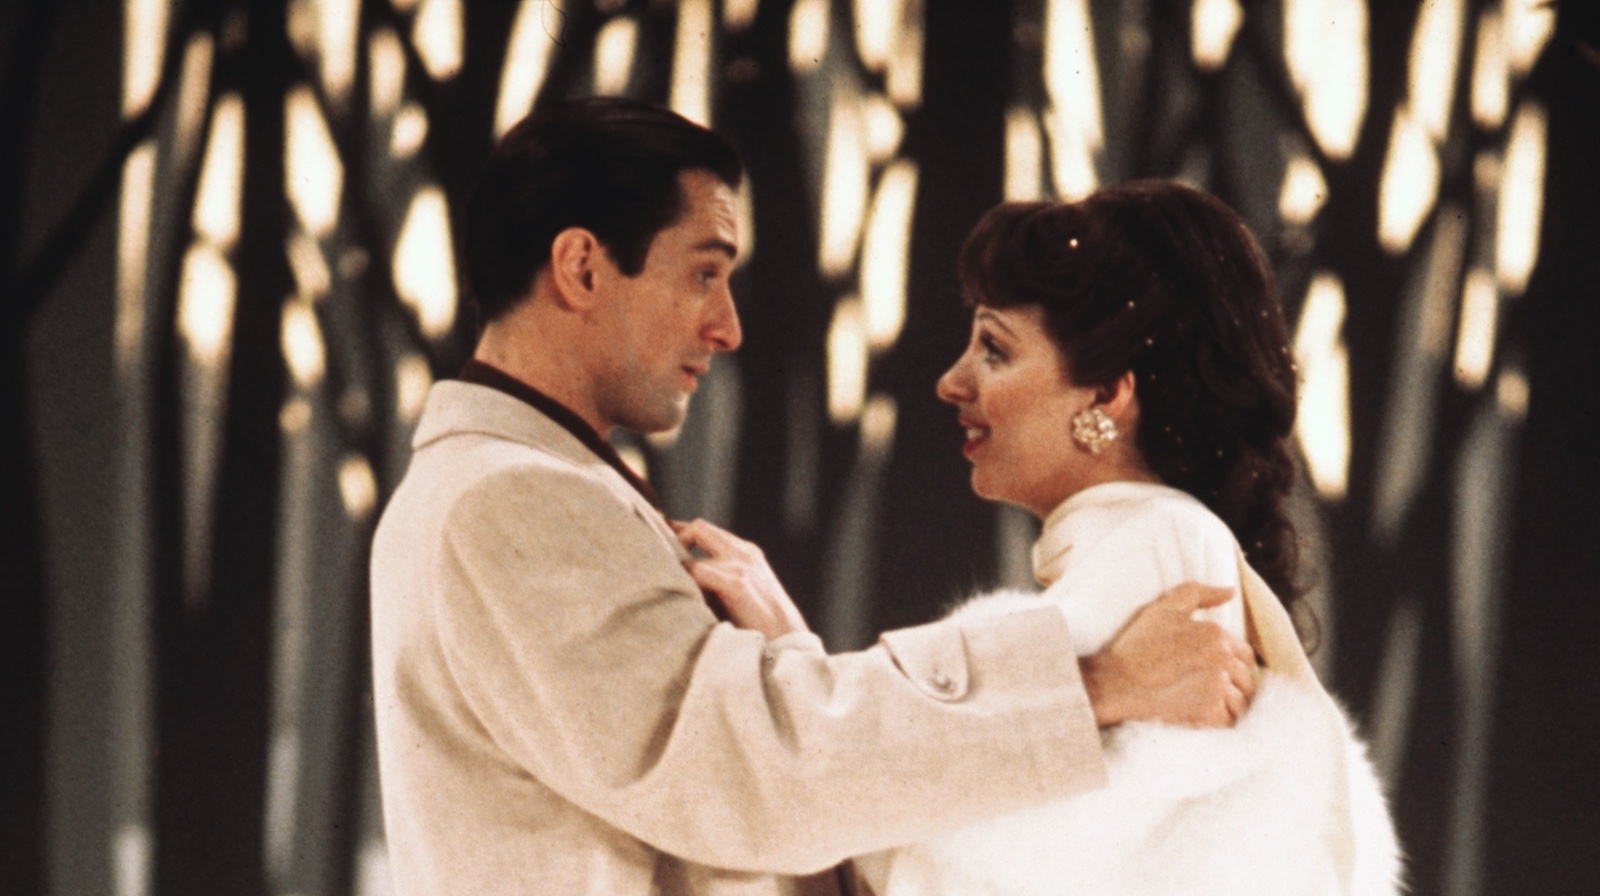 A man in a beige suit and a woman in a white fur coat stand in profile and look at each other, their hands gripping each other, against a forest backdrop